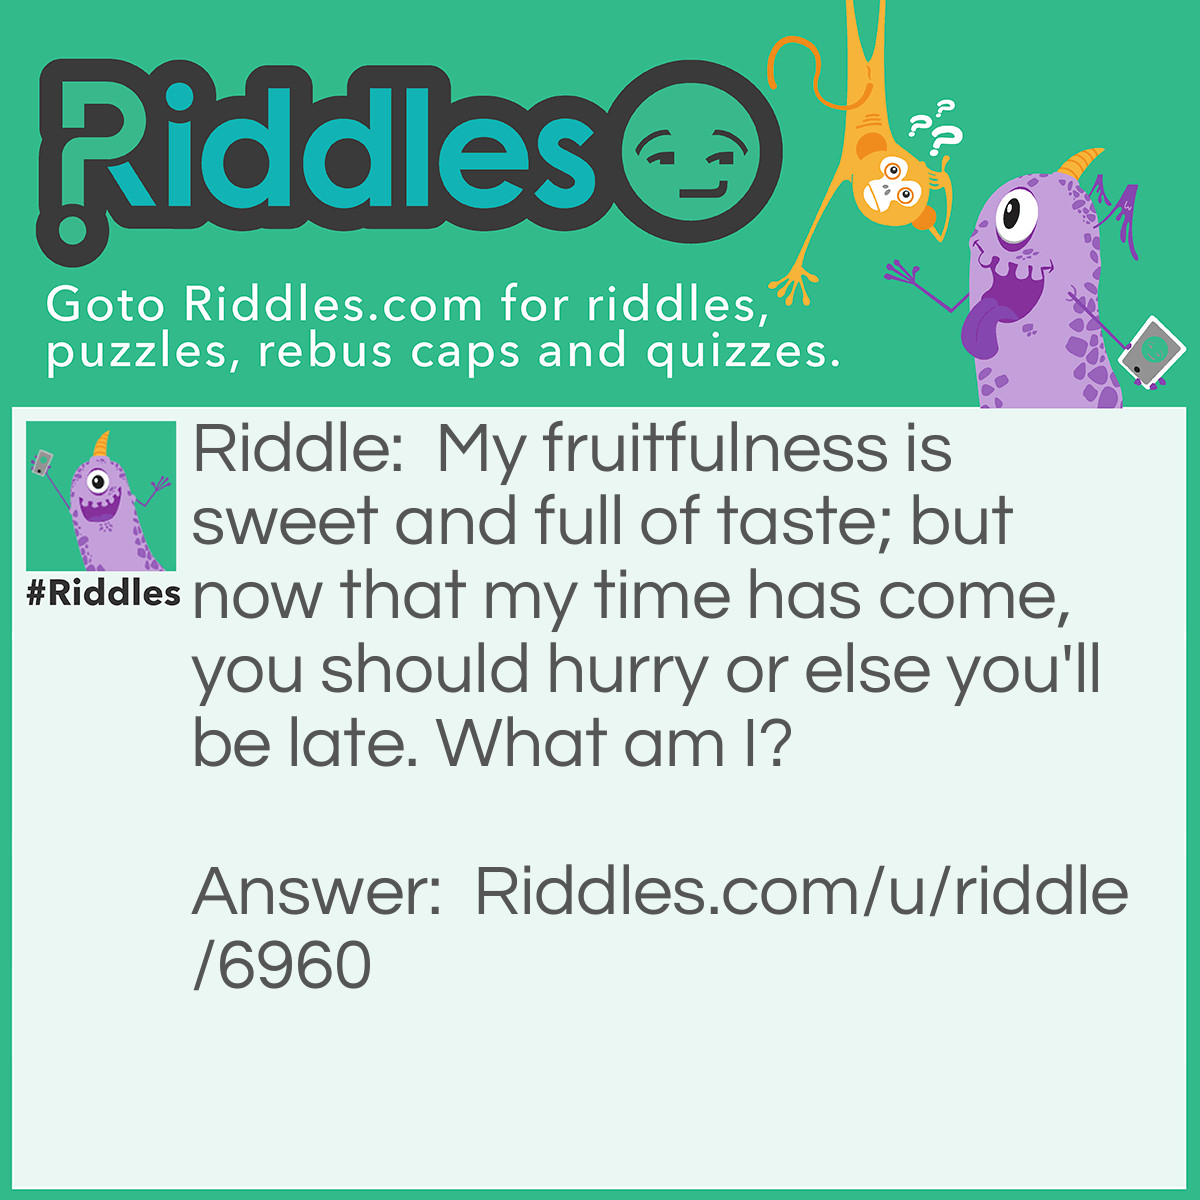 Riddle: My fruitfulness is sweet and full of taste; but now that my time has come, you should hurry or else you'll be late. What am I? Answer: A date.